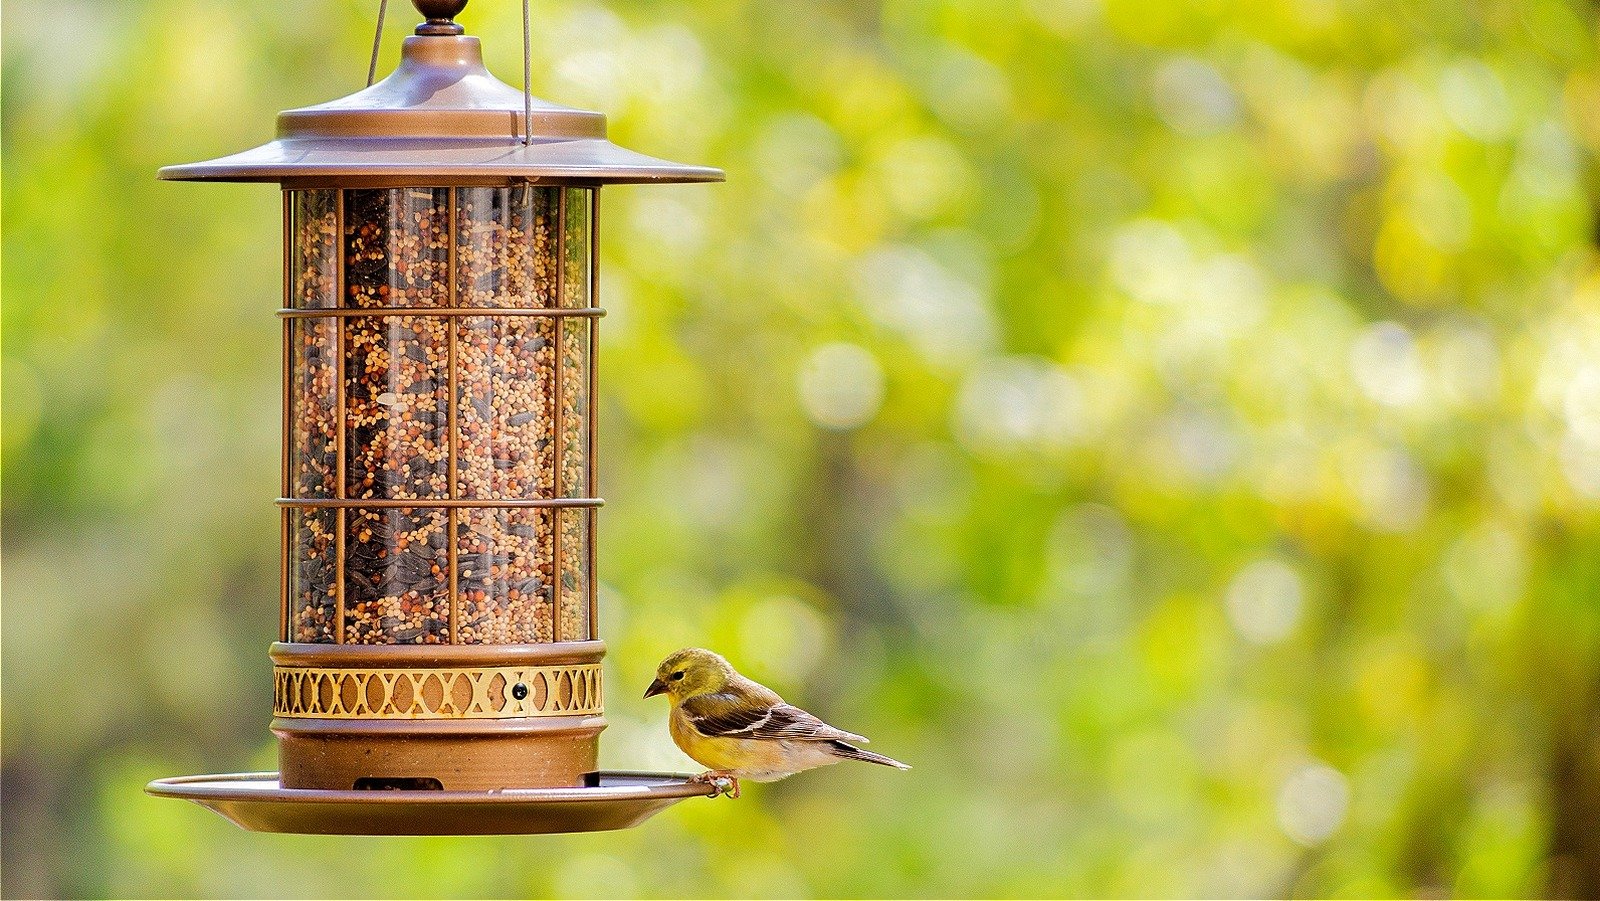 The Best Types Of Bird Feeders For Finches